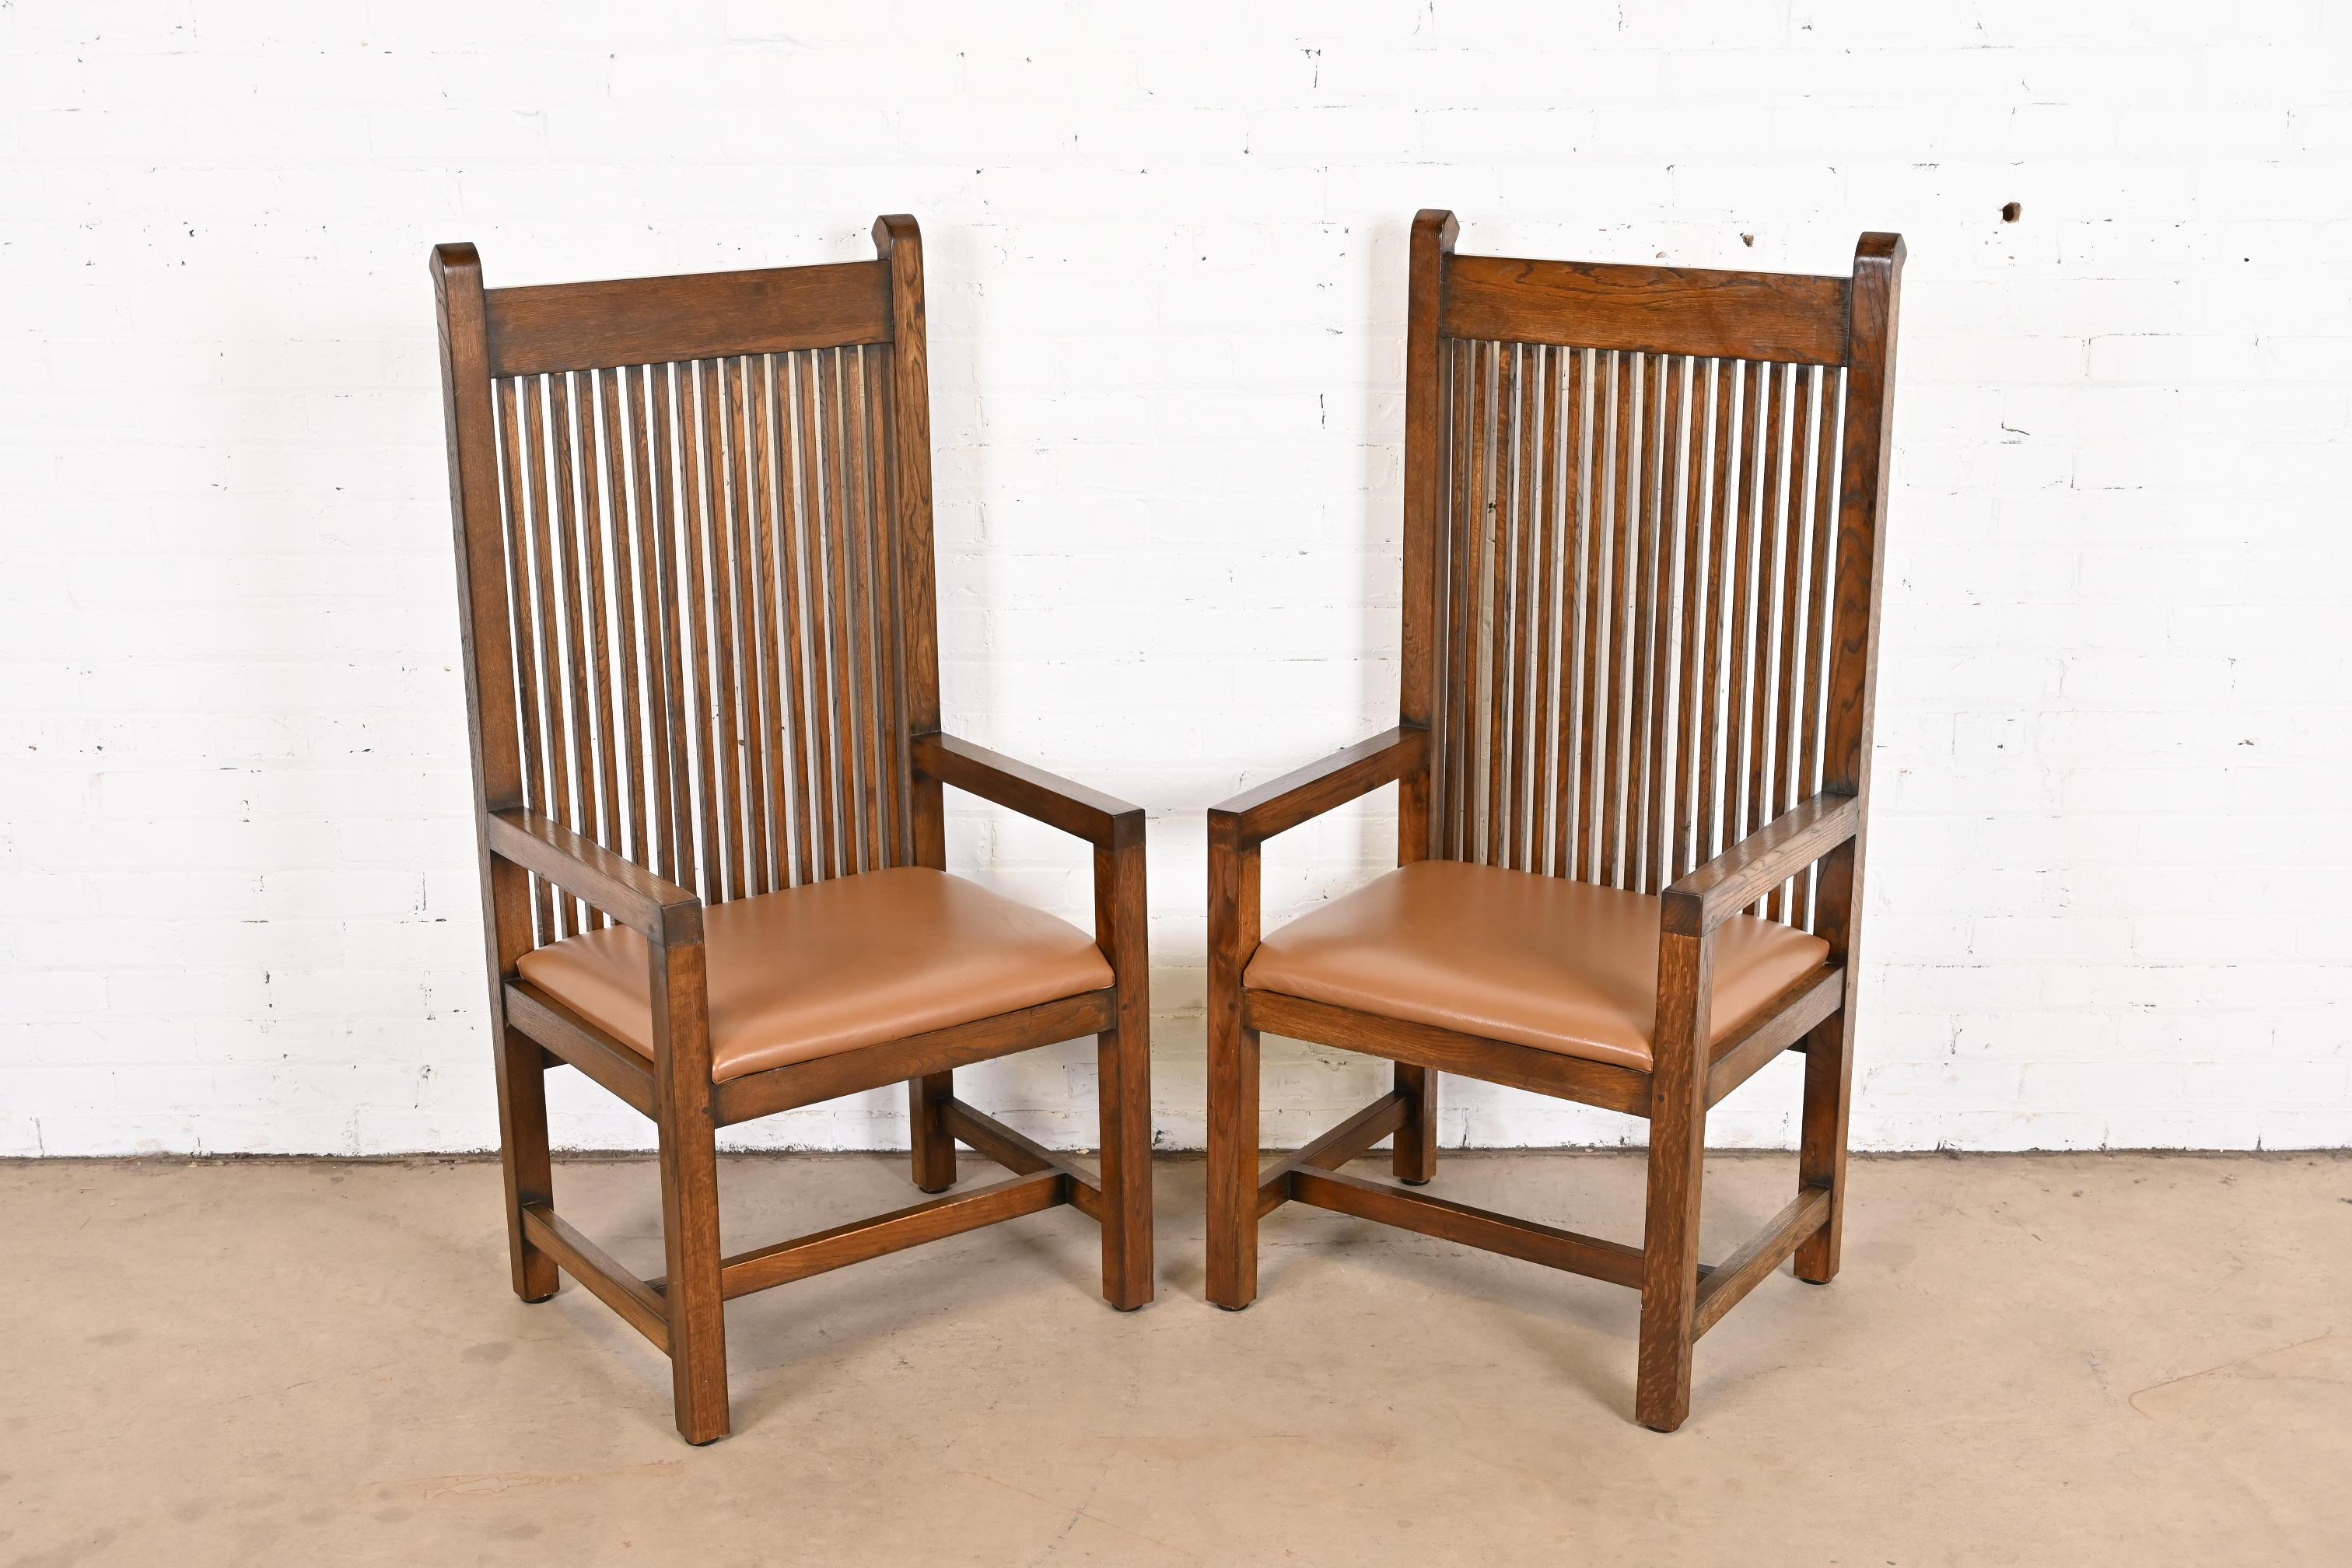 An exceptional pair of Mission or Arts & Crafts style high back club chairs or dining chairs

In the manner of Frank Lloyd Wright

USA, Circa 1980s

Solid quarter sawn oak frames, with leather seats.

Measures: 23.75